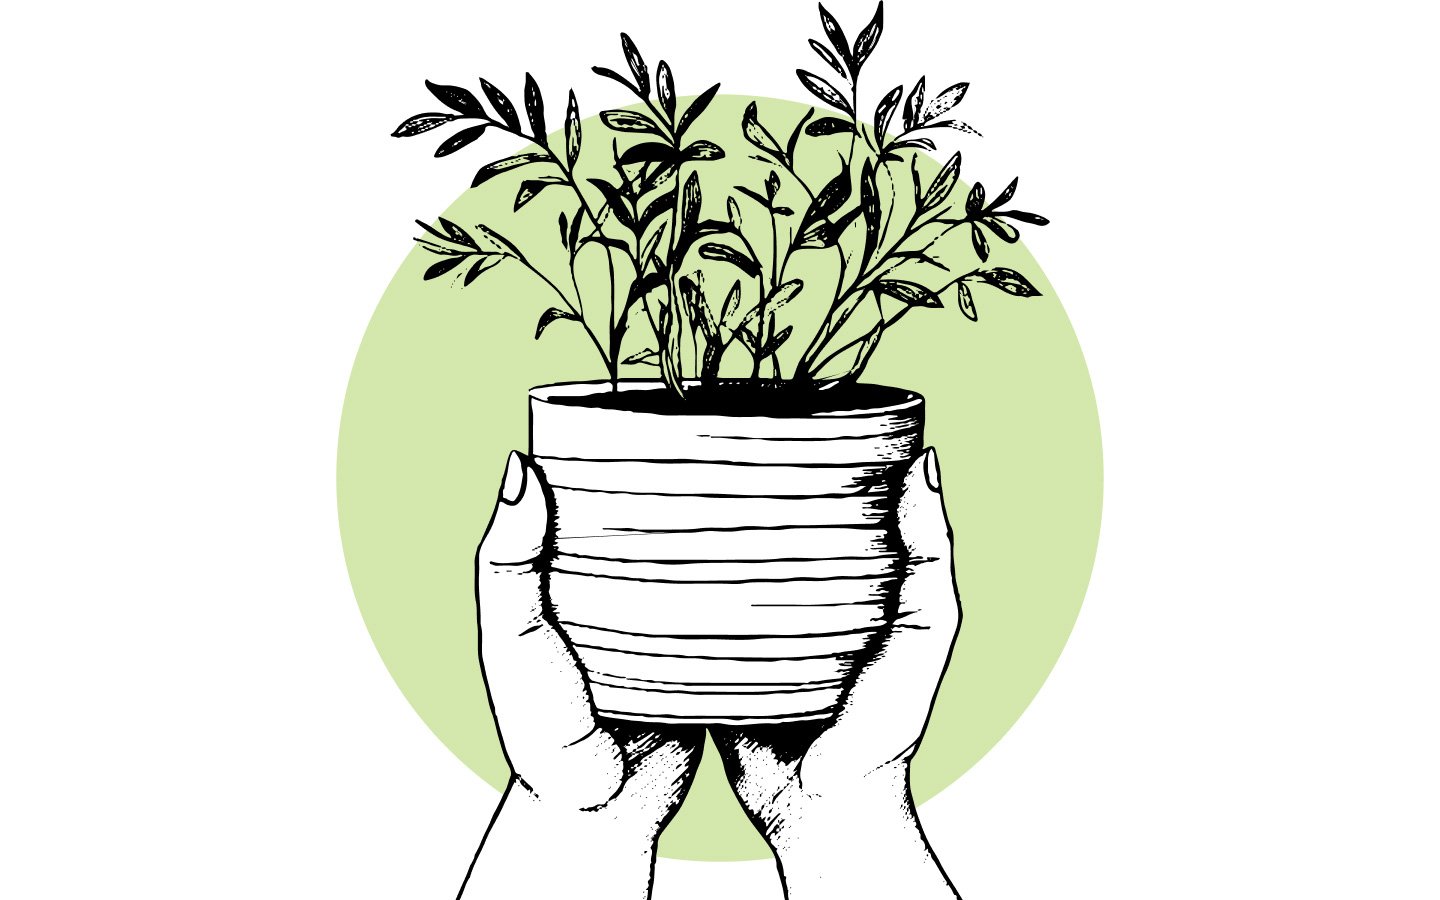 A pair of hands holding a plant pot